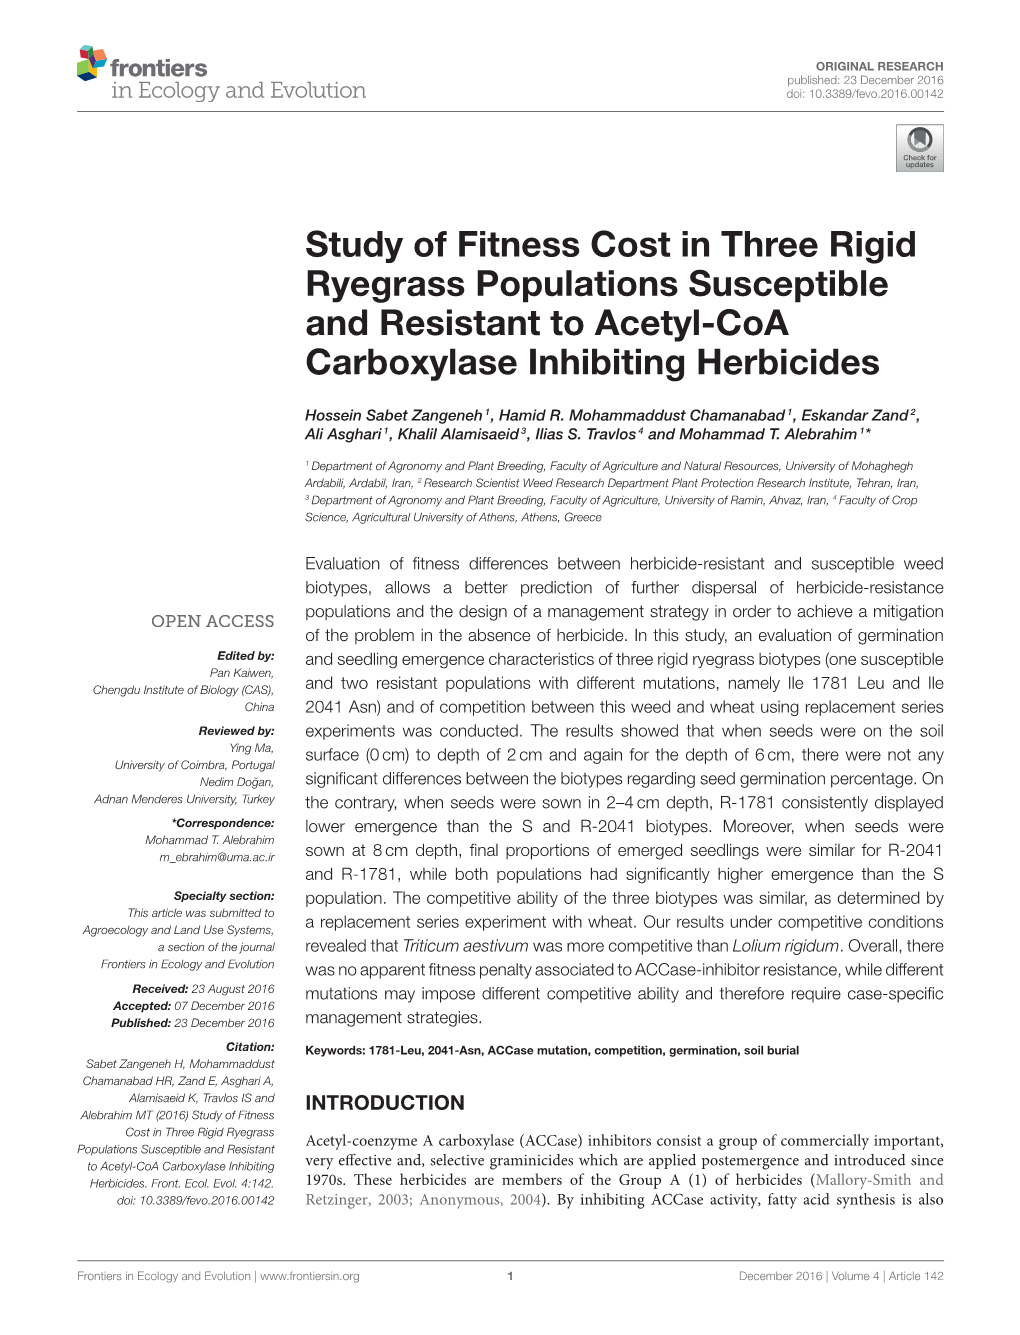 Study of Fitness Cost in Three Rigid Ryegrass Populations Susceptible and Resistant to Acetyl-Coa Carboxylase Inhibiting Herbicides